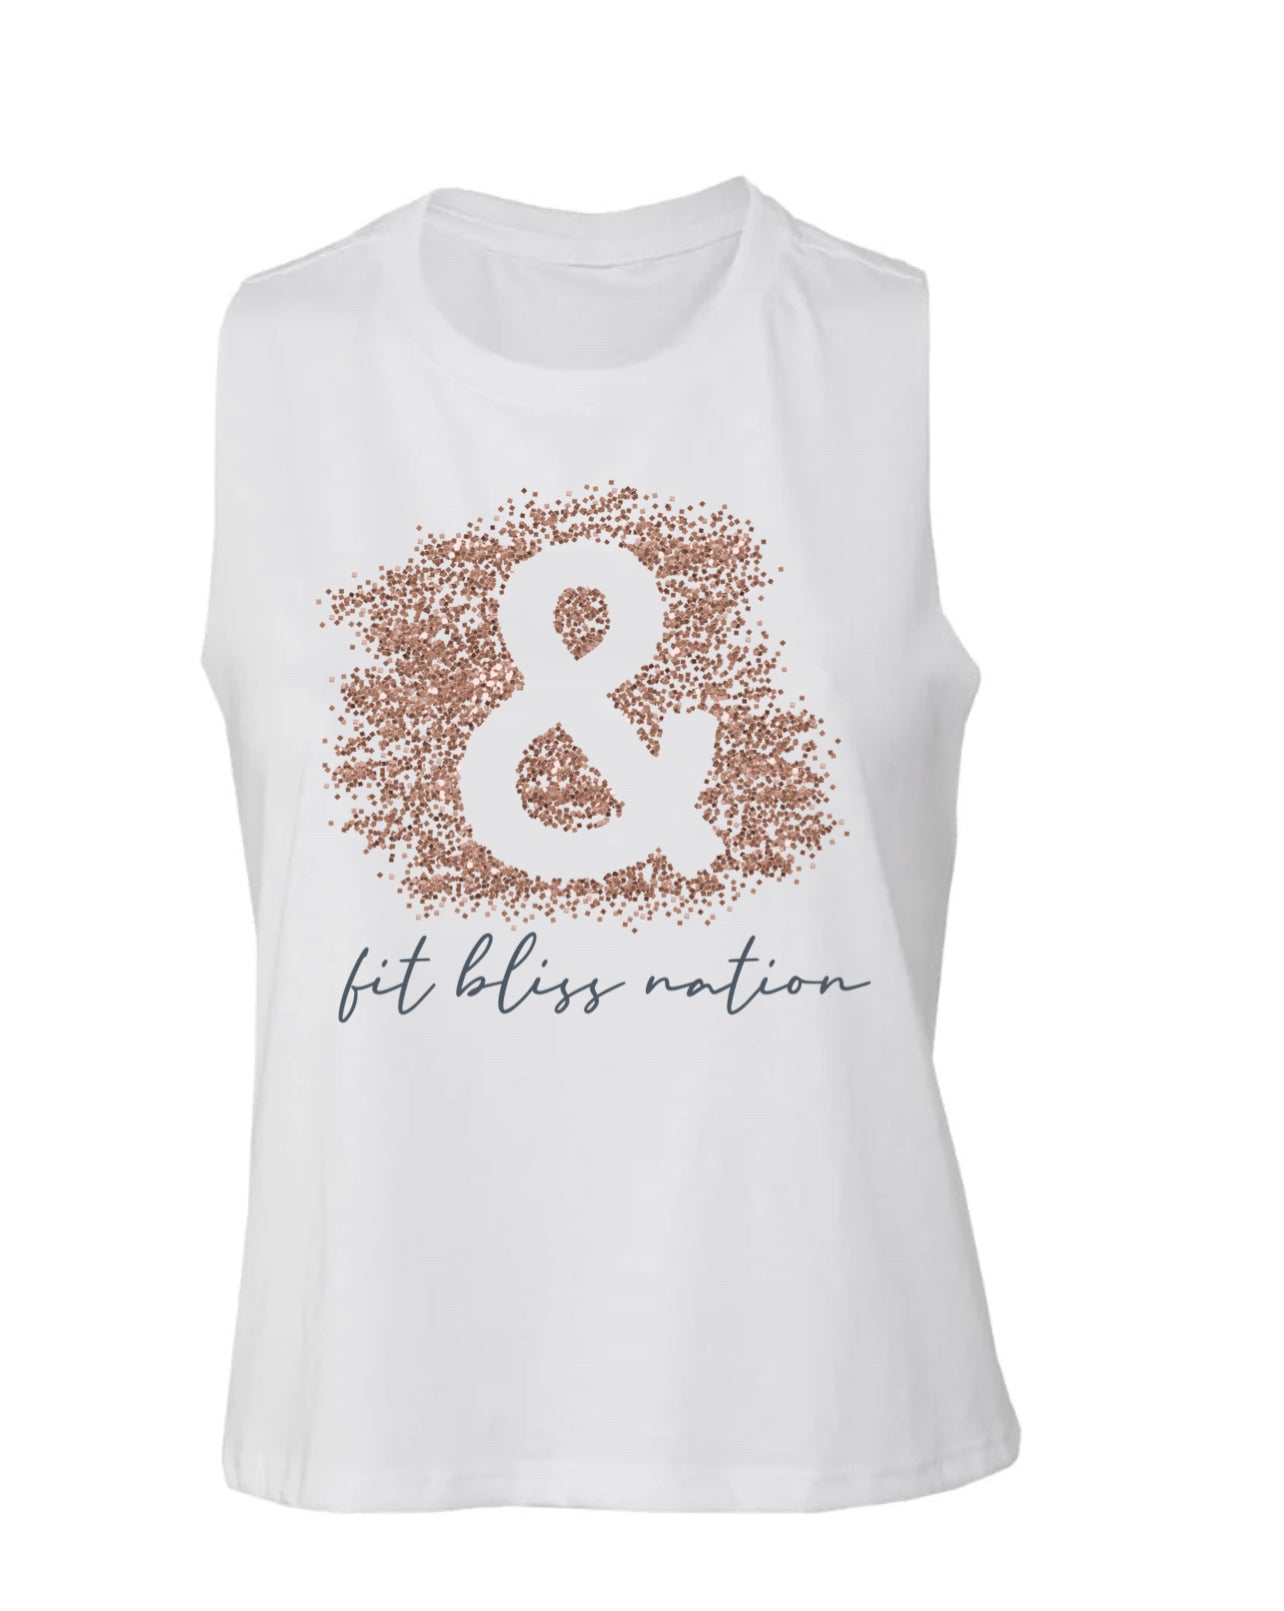 FIT BLISS NATION CROP TANK